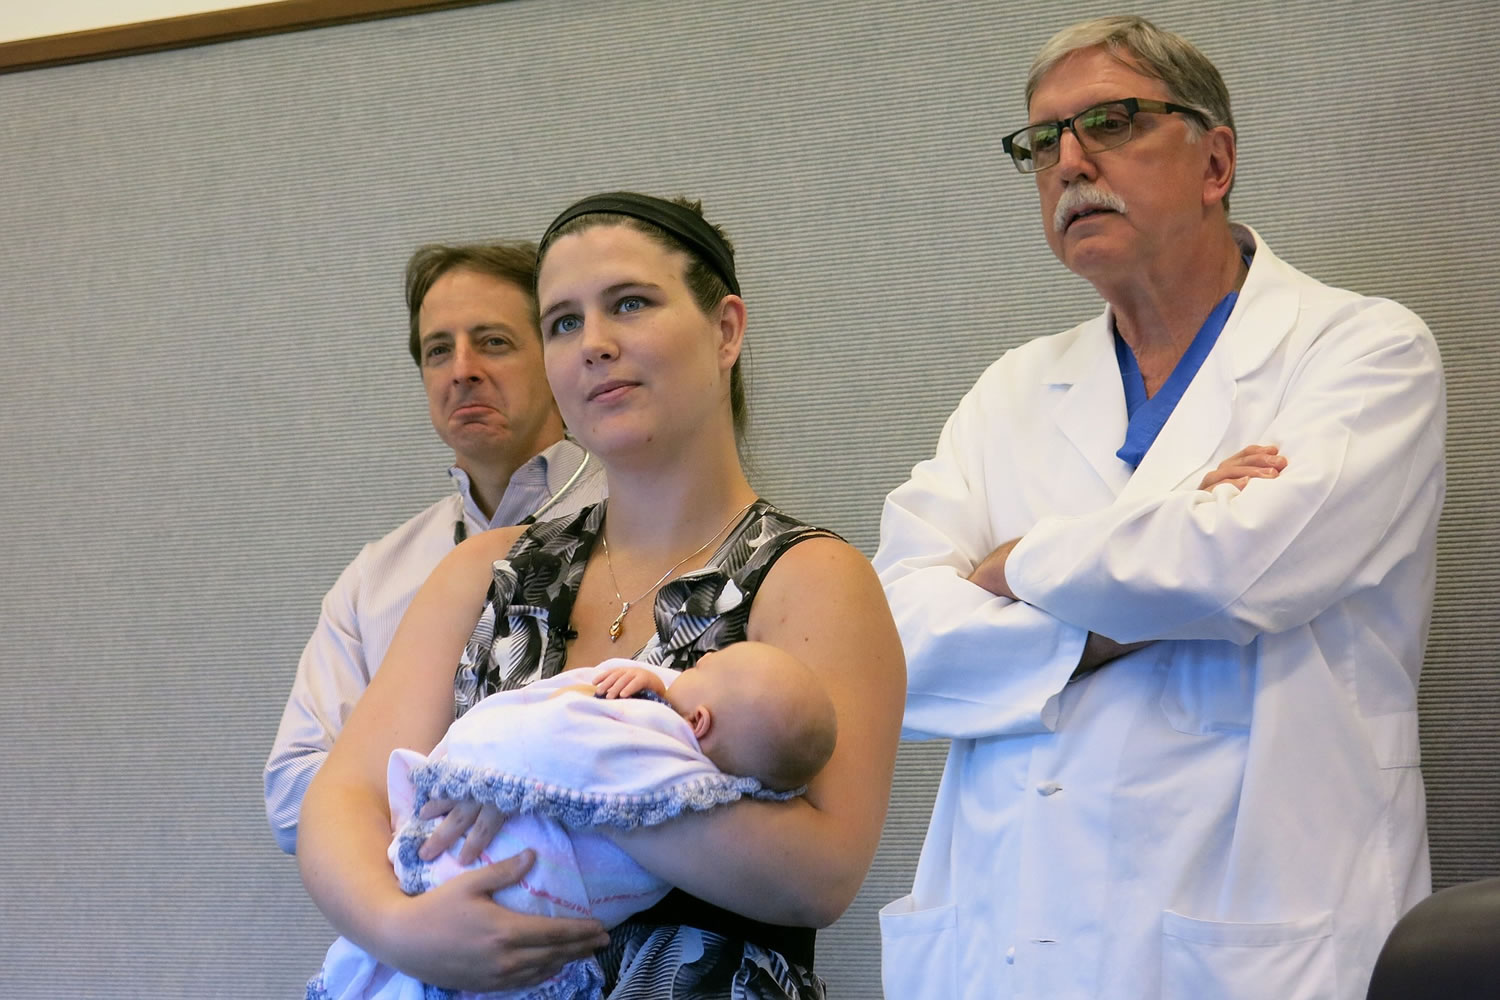 Katie Dickens, 23, holds her newborn baby flanked by her cardiologists on Monday at Providence St. Vincent Medical Center in Portland.